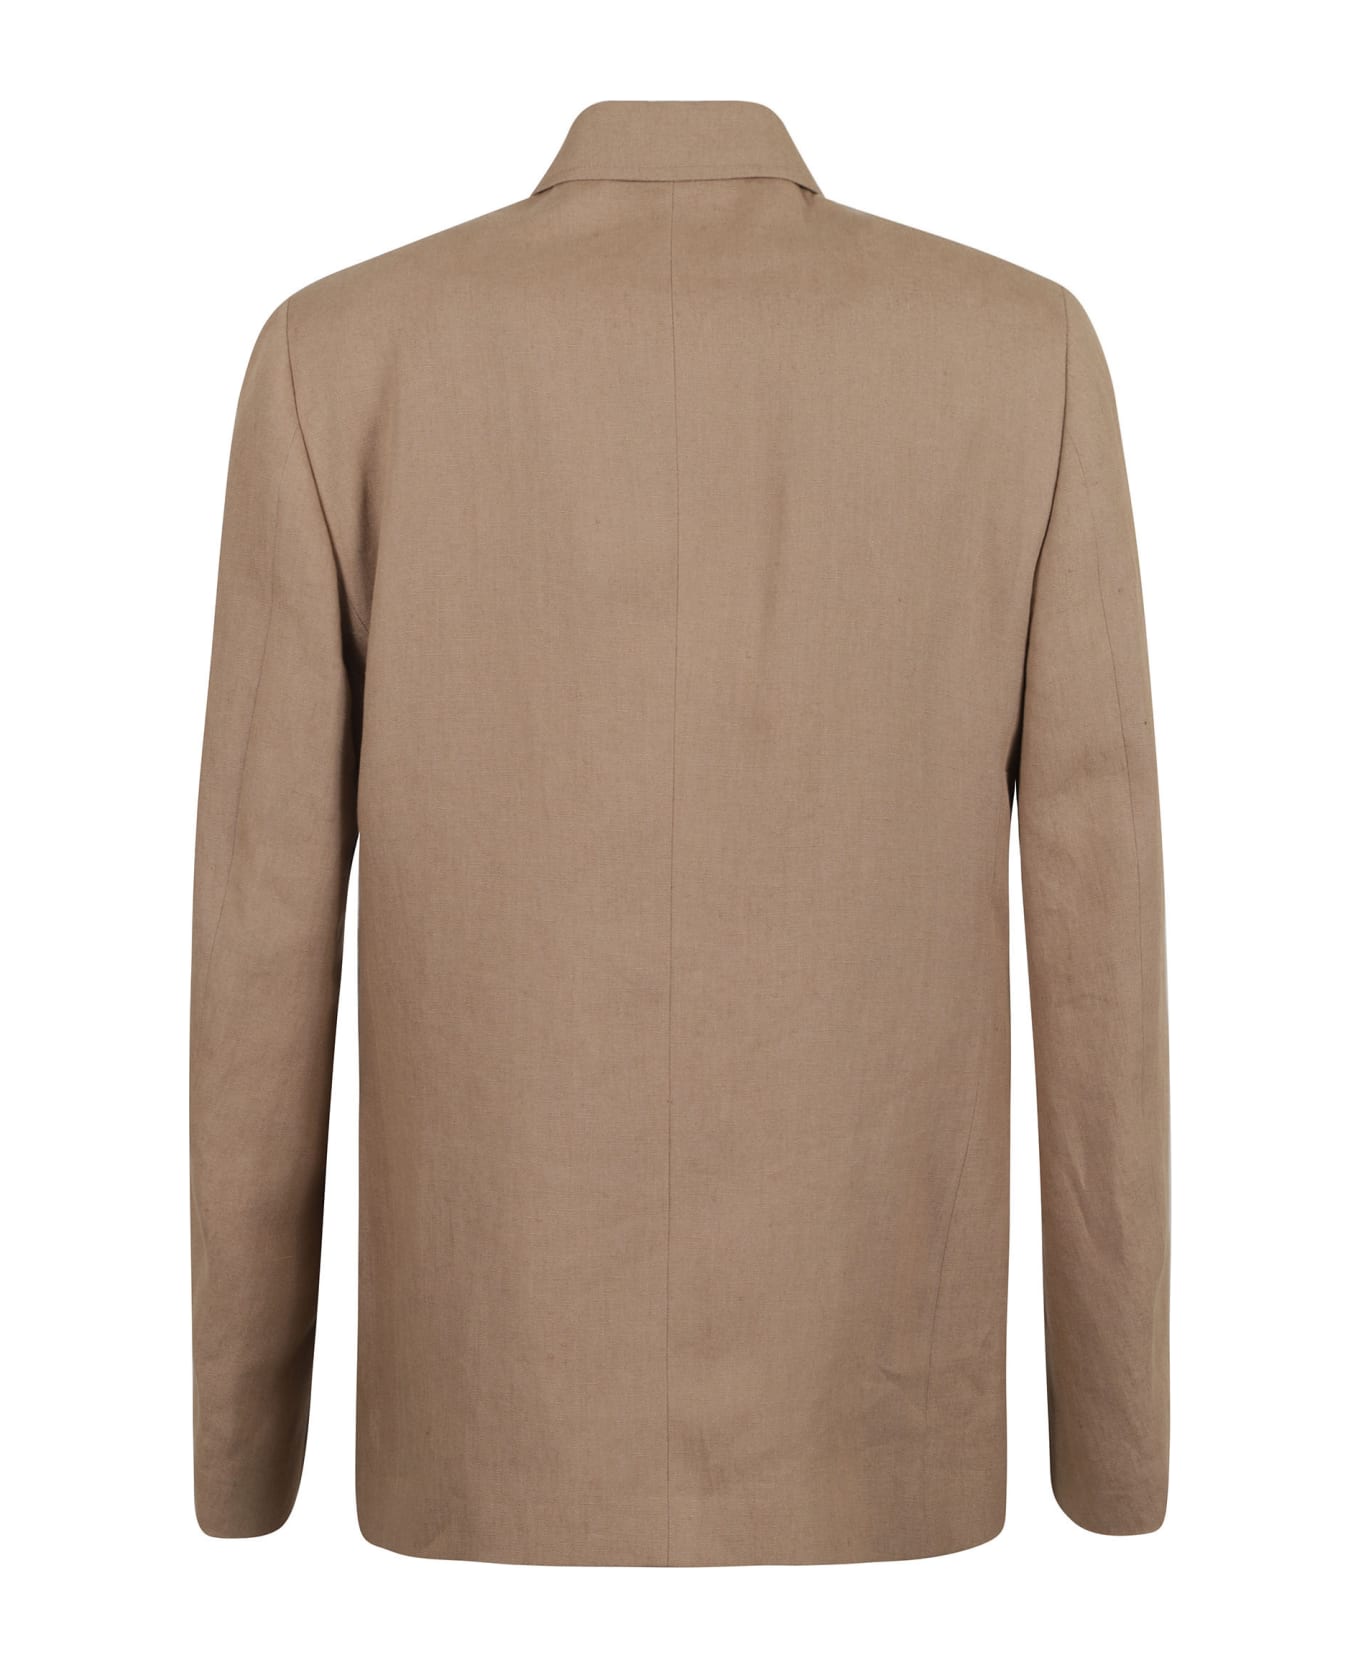 Lardini Double-breasted Formal Dinner Jacket - Taupe ブレザー